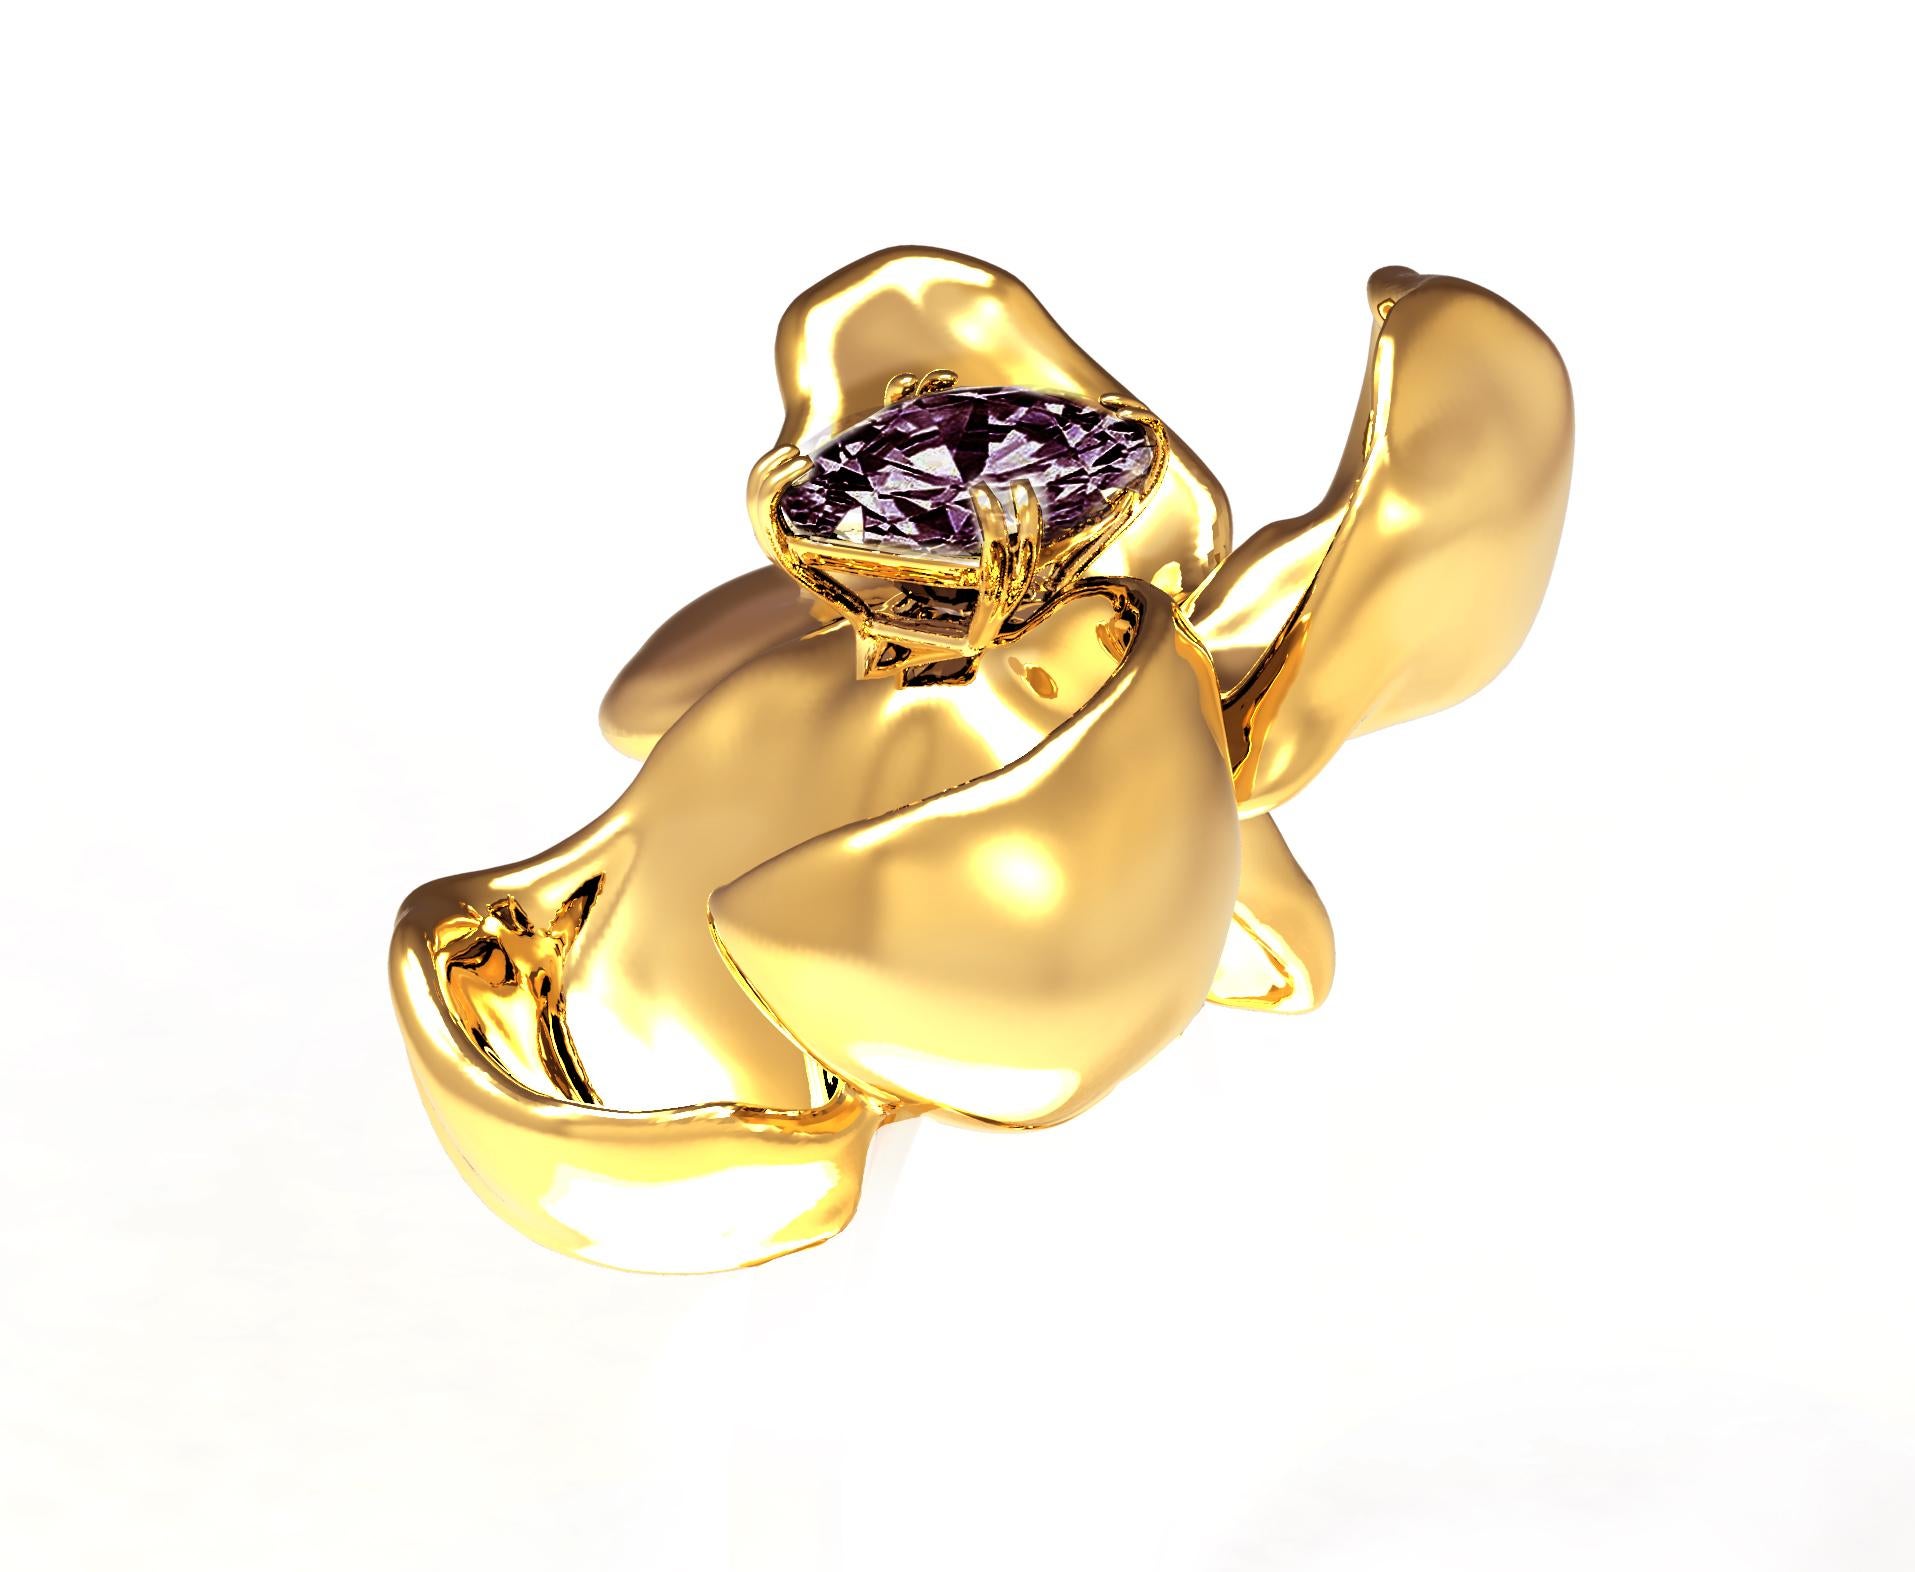 This Magnolia Flower contemporary brooch is made of 18 karat yellow gold and features a storm purple cushion spinel (1.38 carats). The tender water-surface of the spinel multiplies the light, reflecting on the golden petals. The weight is